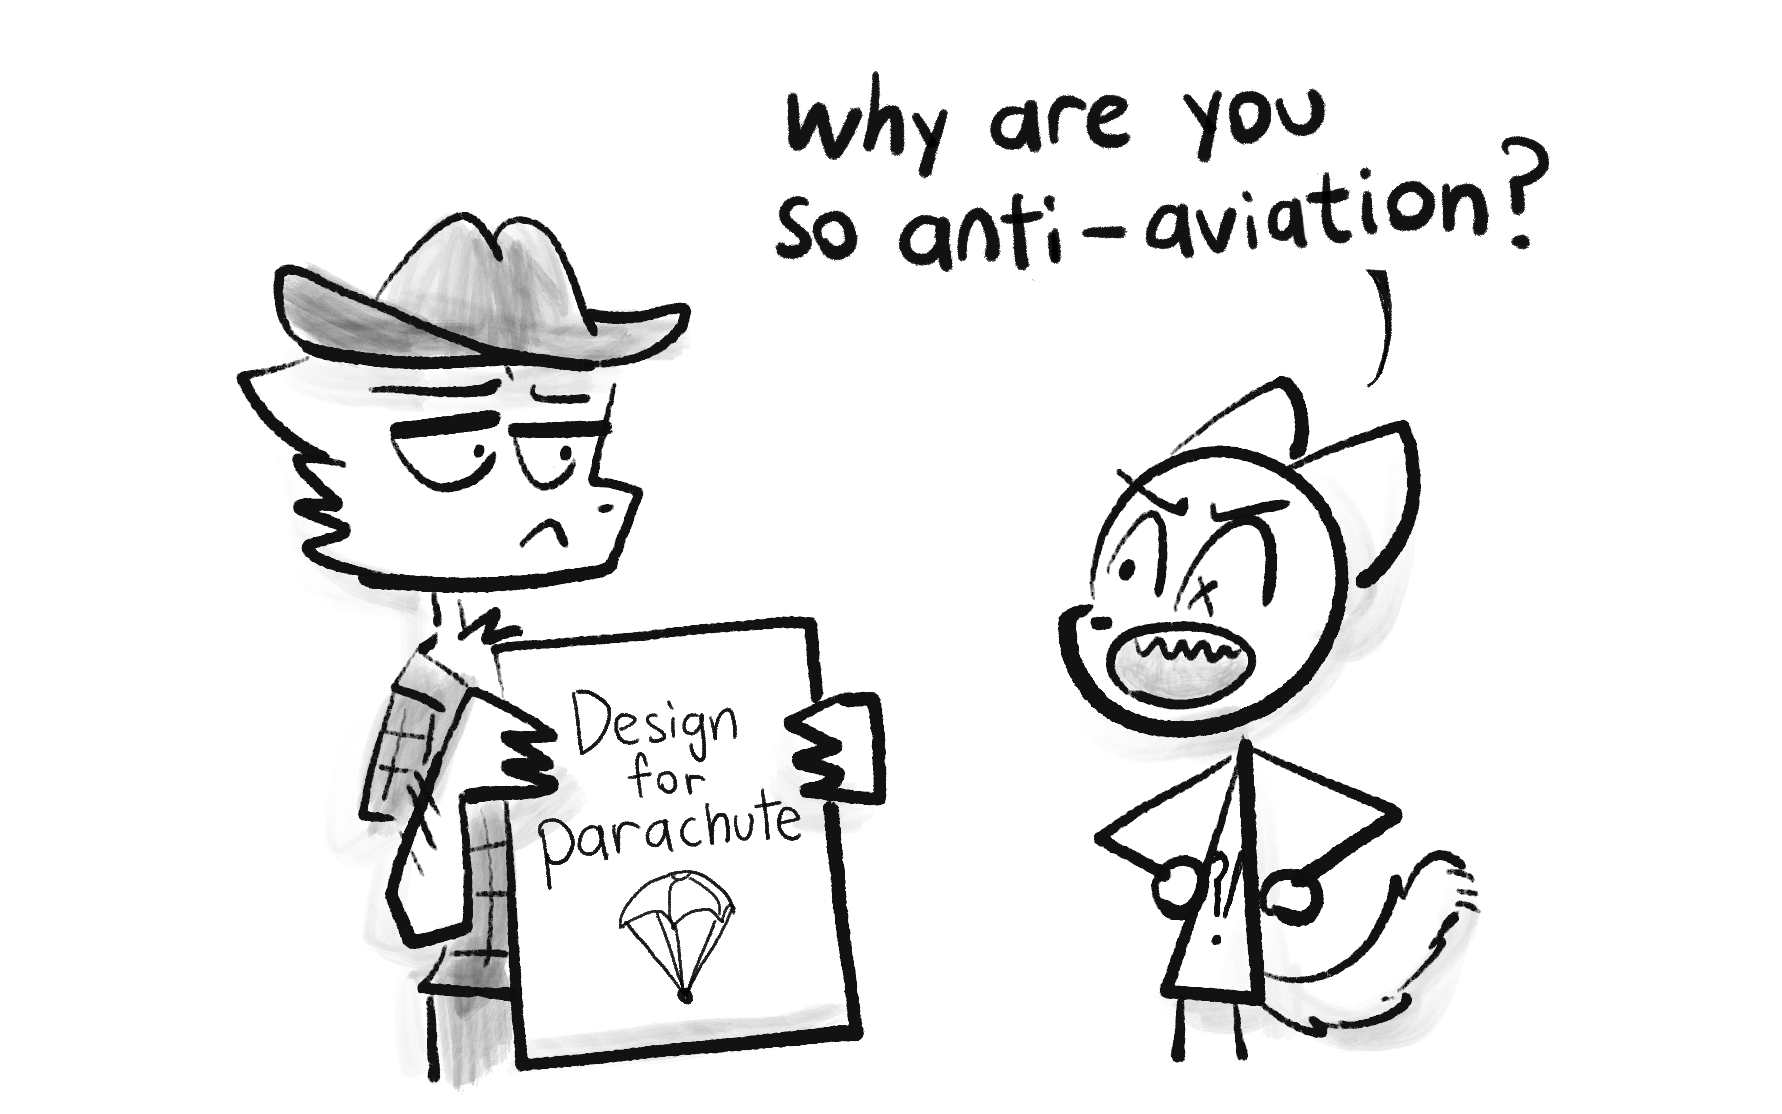 Comic. Sheriff Meowdy holds up a blueprint for a parachute design. Ham the Human retorts, annoyed: “Why are you so anti-aviation?”